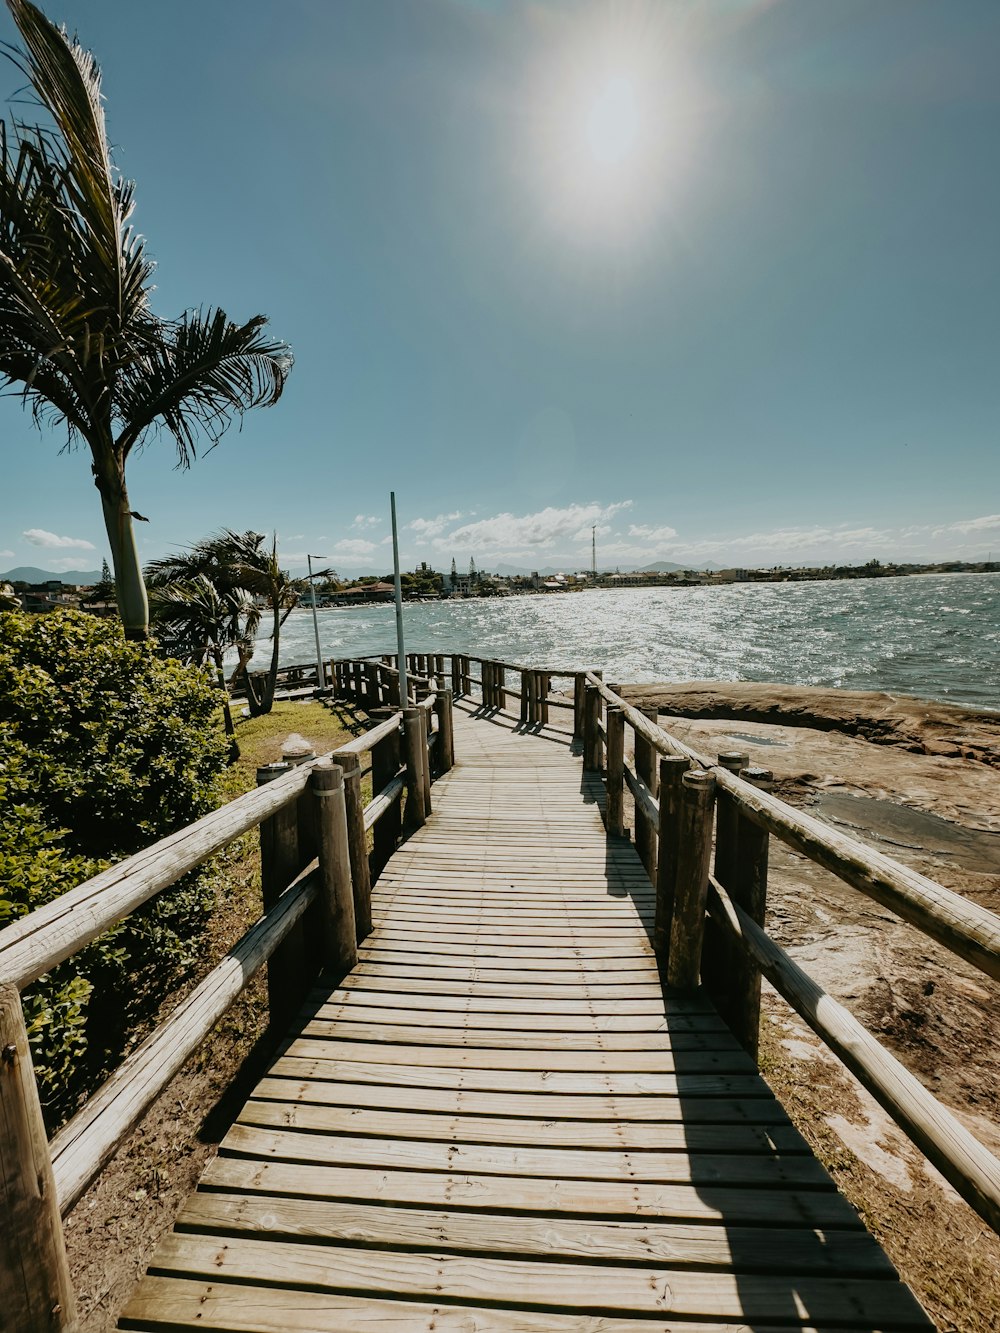 a wooden walkway leading to a beach with palm trees